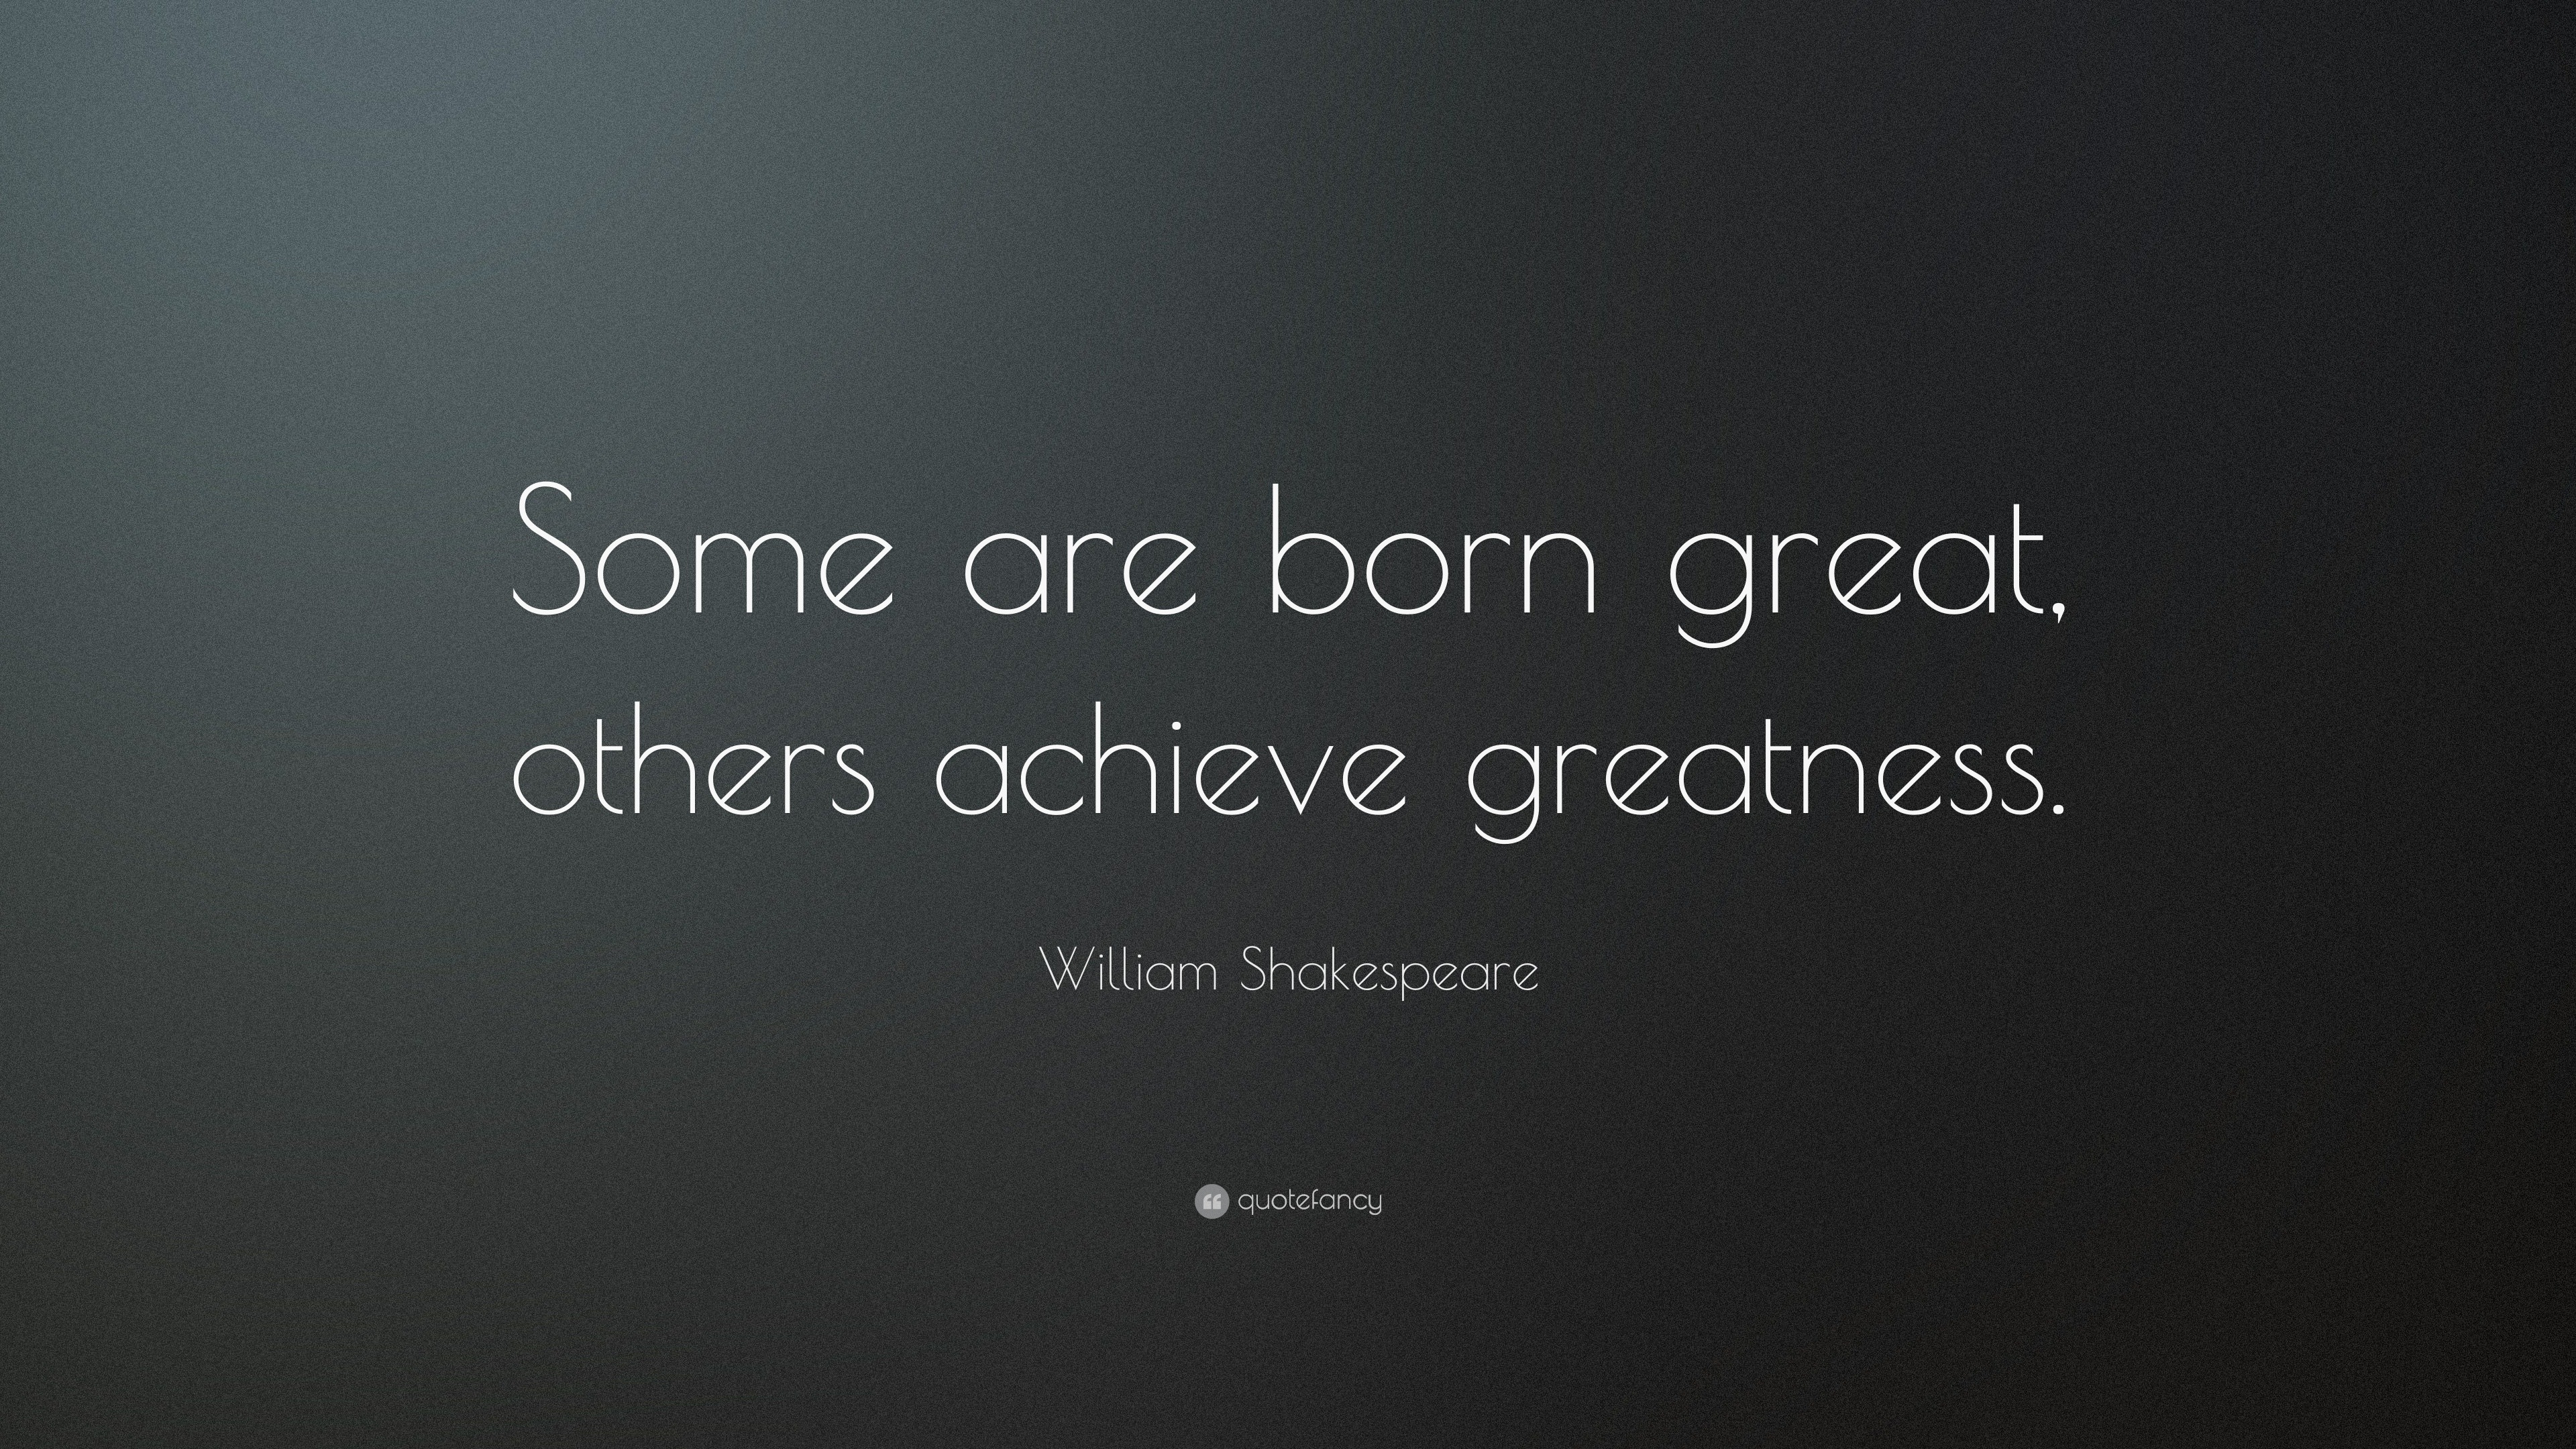 William Shakespeare Quote “Some are born great others achieve greatness ”